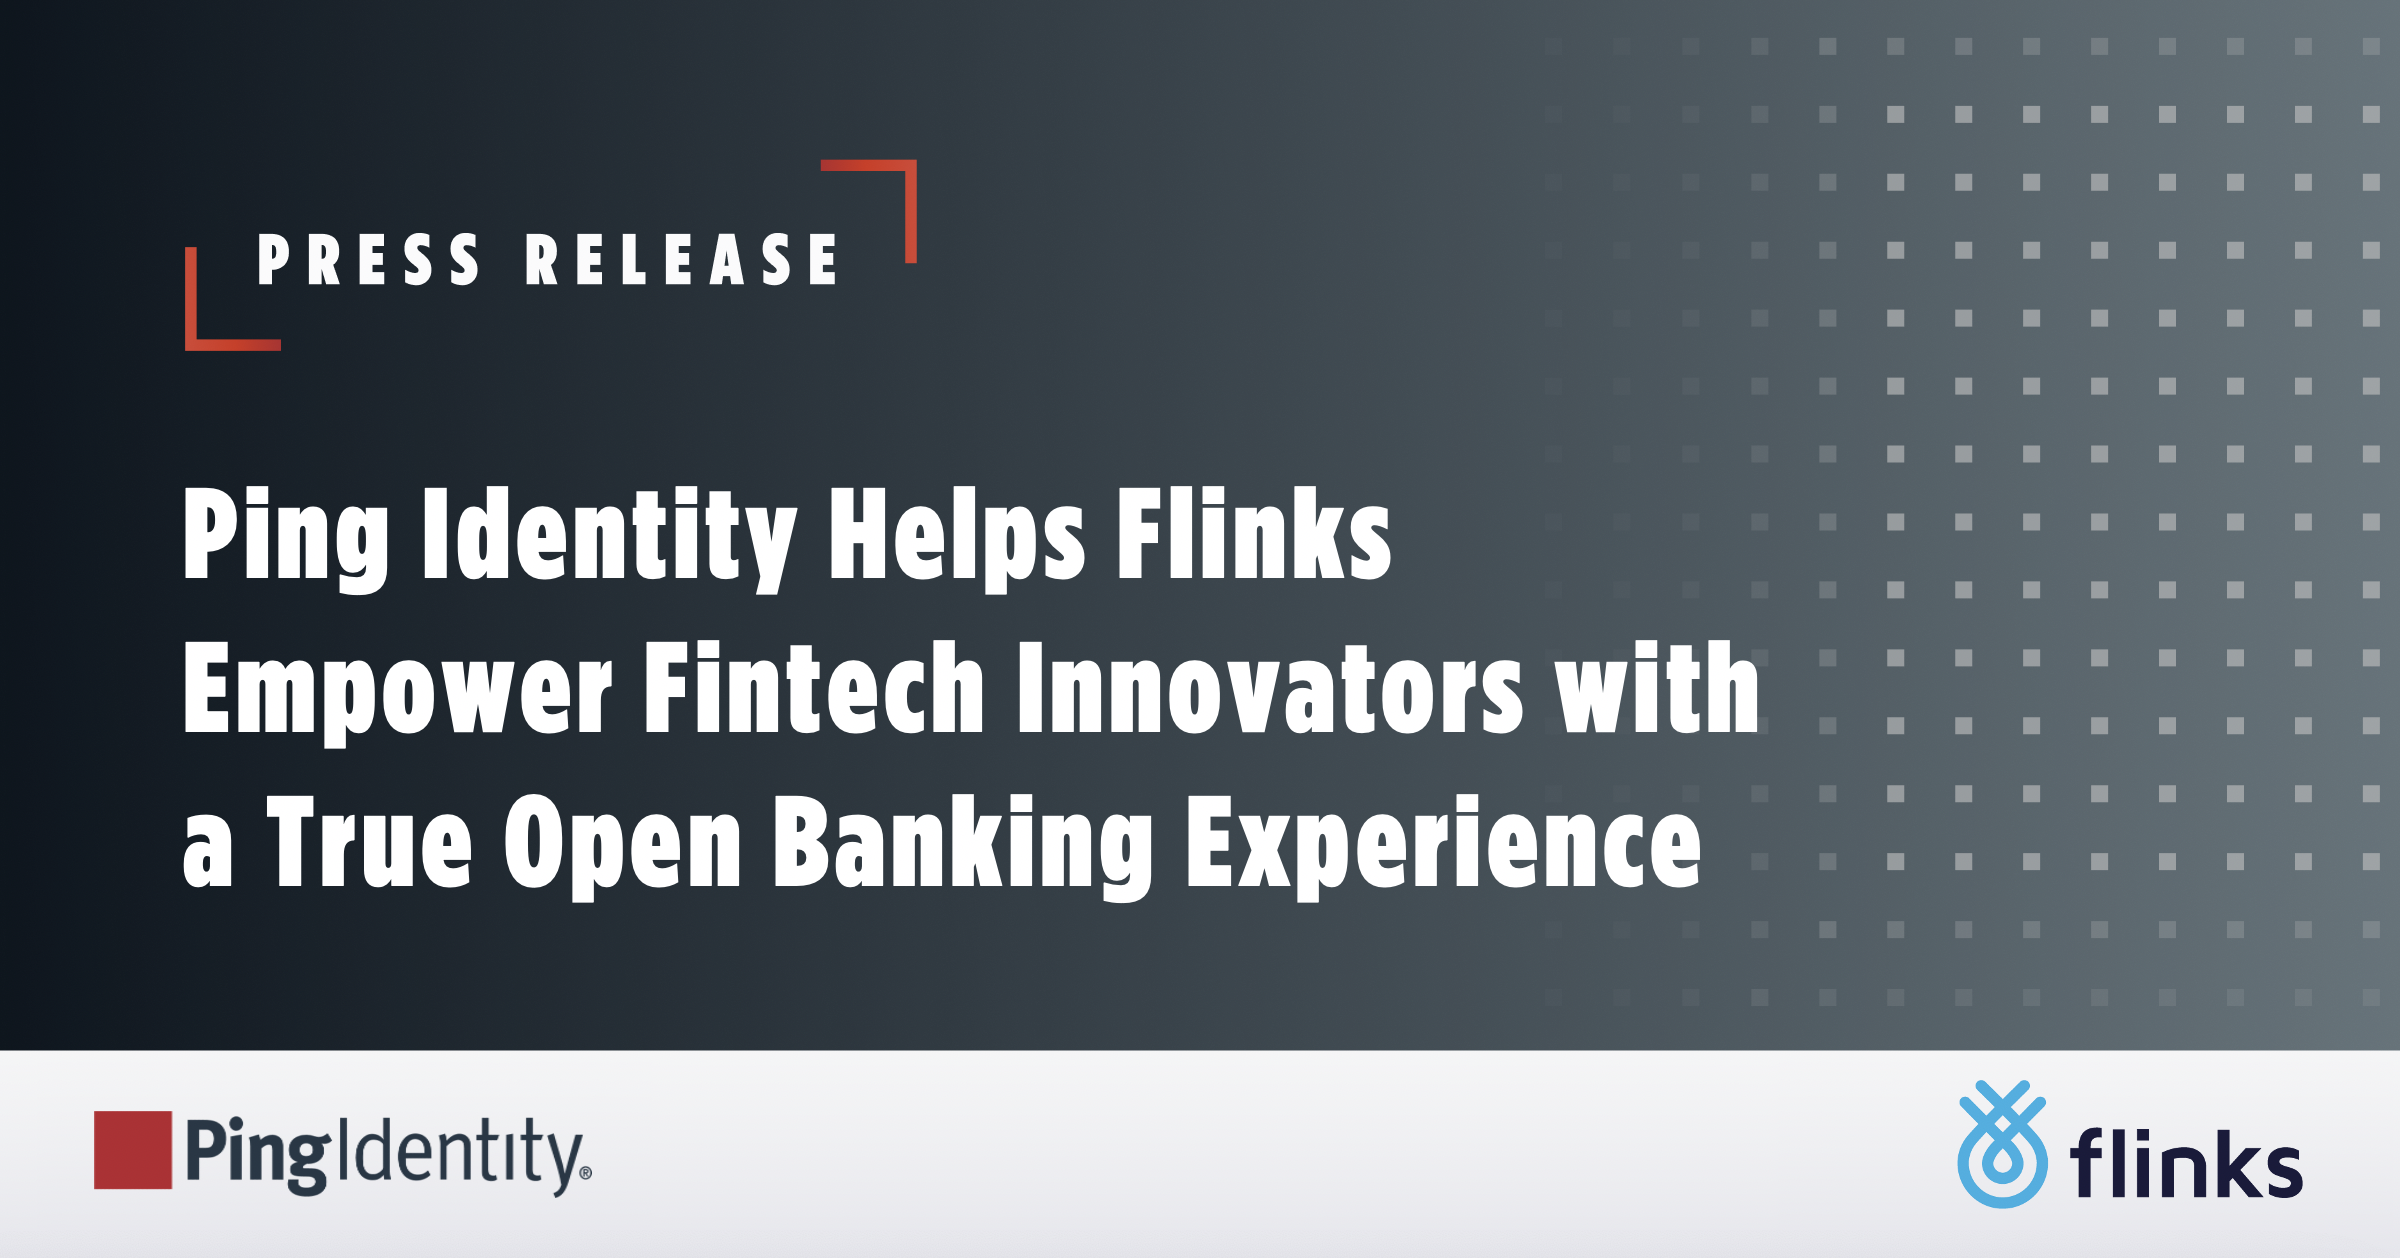 Ping Identity Helps Flinks Empower Fintech Innovators with a True Open Banking Experience